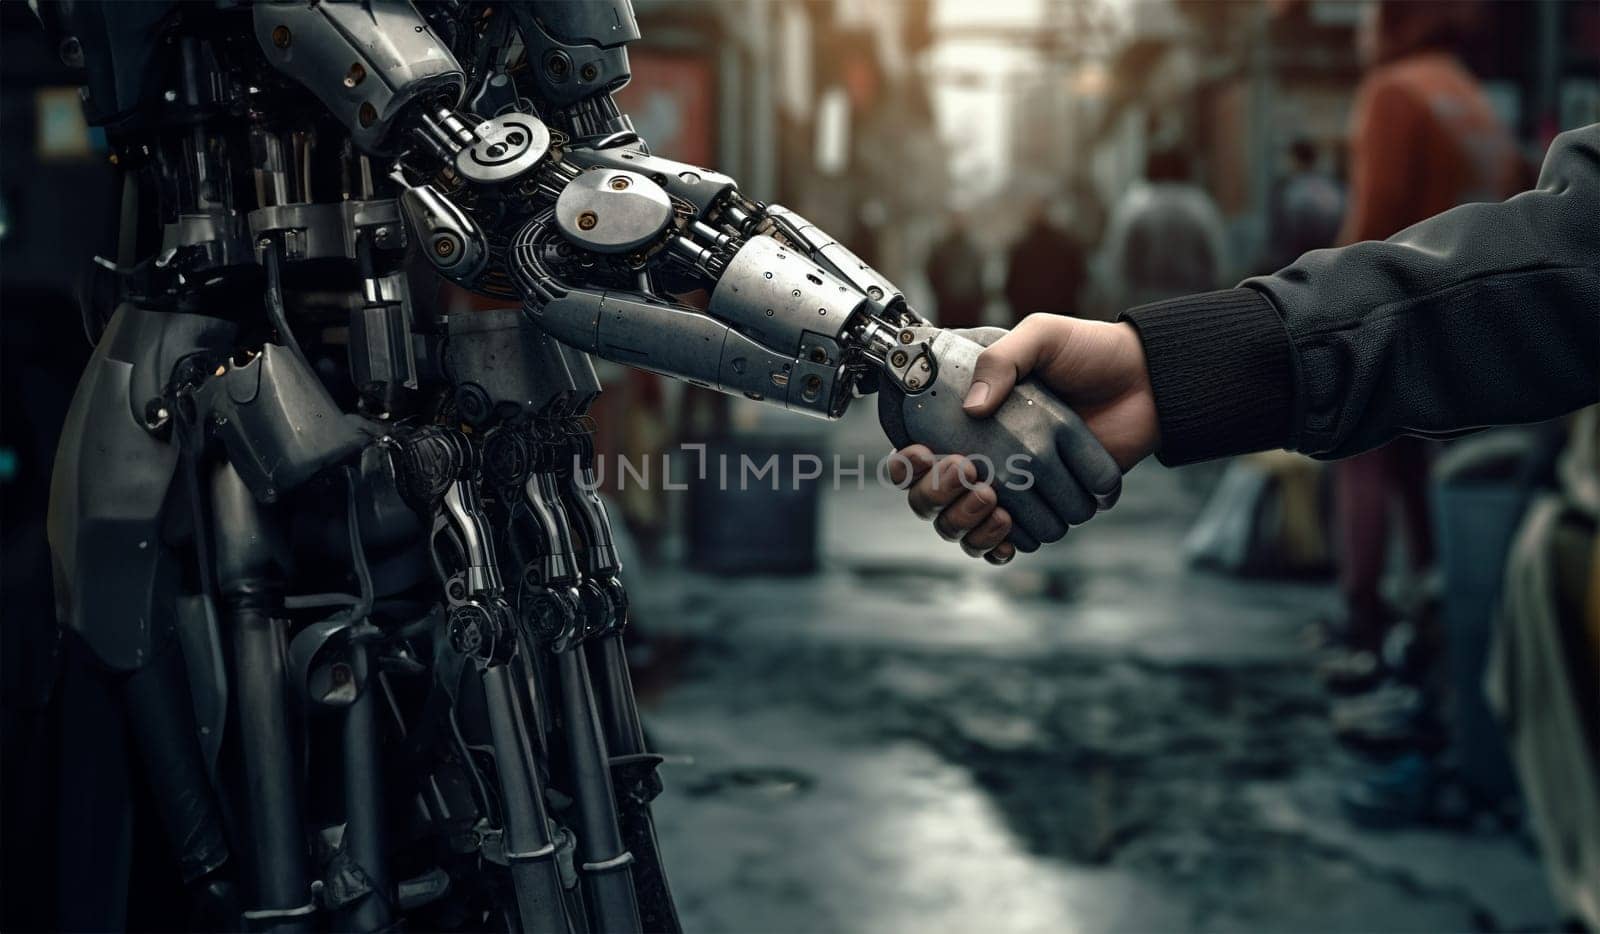 The hand of a metal robot shakes the hand of a man in a black jacket. Against the backdrop of the city